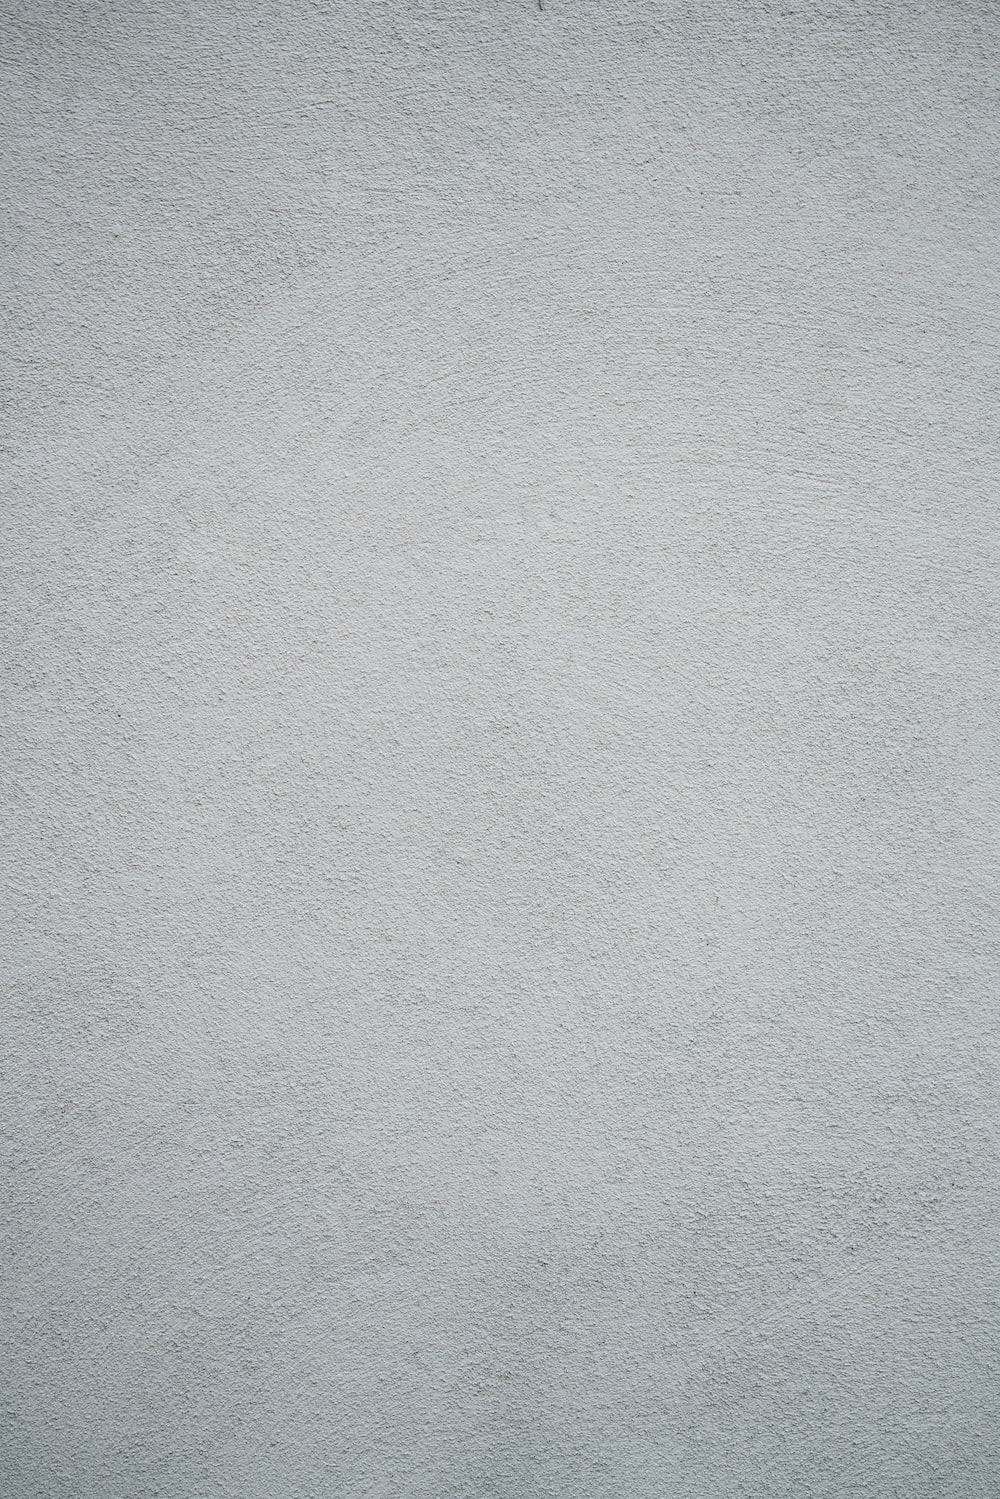 Grey Texture Picture [HQ]. Download Free Image